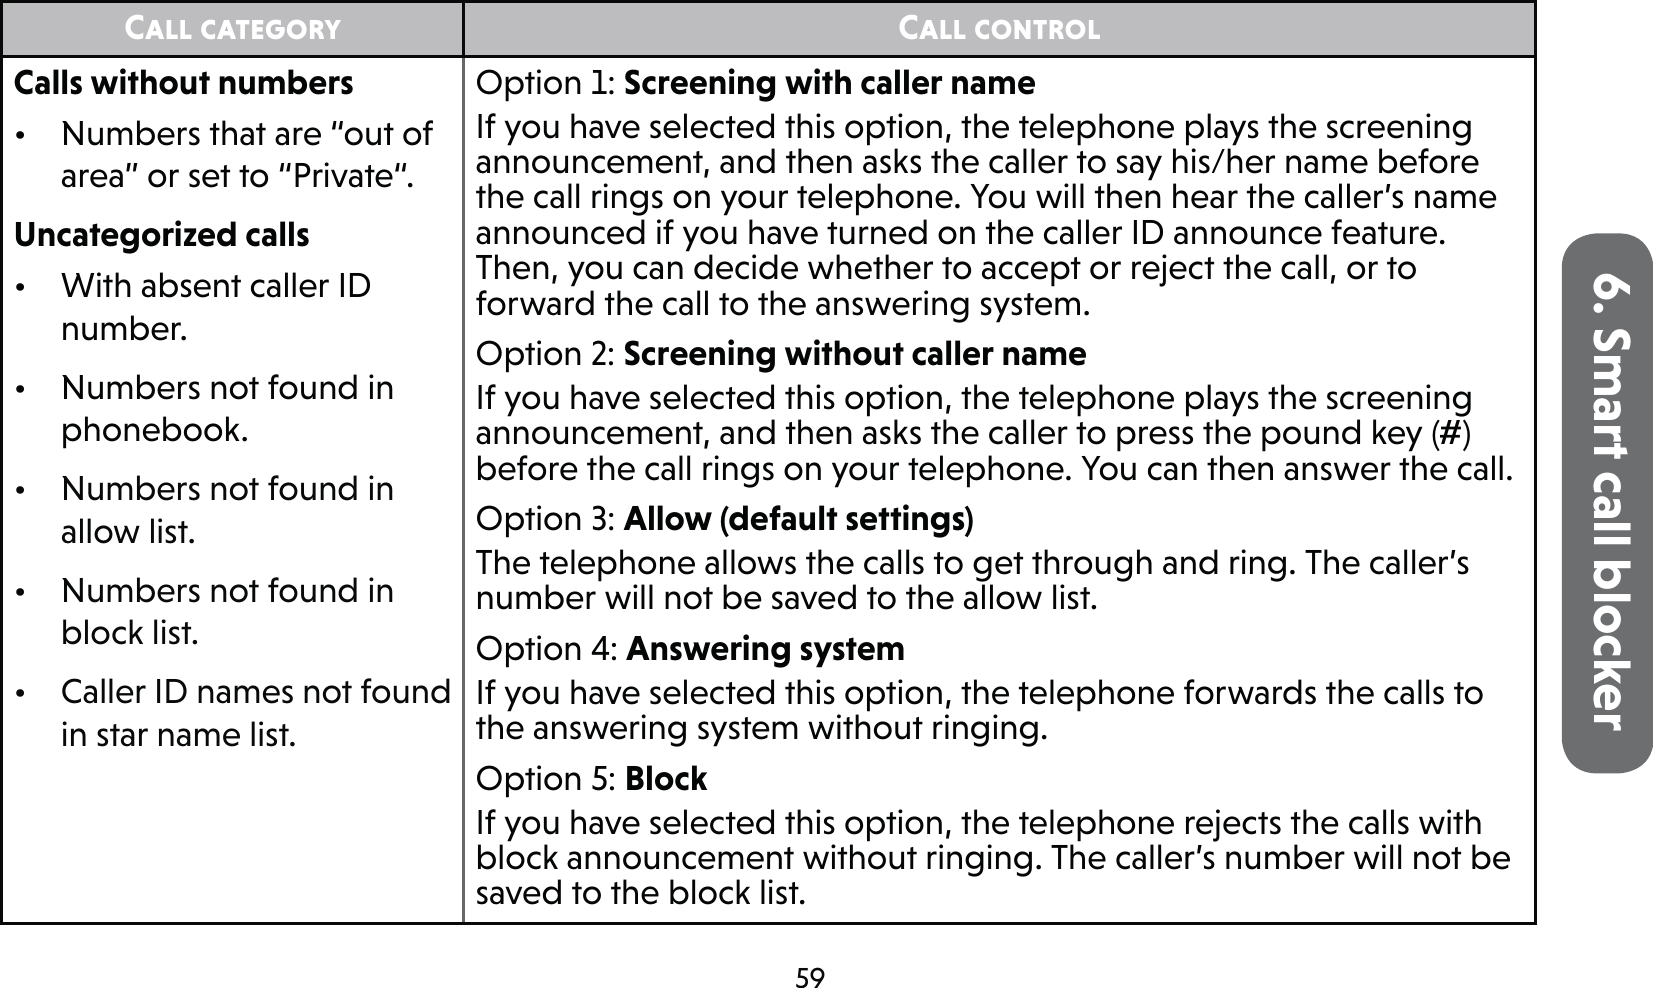 596. Smart call blockerCall category Call controlCalls without numbers•  Numbers that are “out of area” or set to “Private“.Uncategorized calls•  With absent caller ID number. •  Numbers not found in phonebook.•  Numbers not found in allow list.•  Numbers not found in block list.•  Caller ID names not found in star name list.Option 1: Screening with caller nameIf you have selected this option, the telephone plays the screening announcement, and then asks the caller to say his/her name before the call rings on your telephone. You will then hear the caller’s name announced if you have turned on the caller ID announce feature. Then, you can decide whether to accept or reject the call, or to forward the call to the answering system.Option 2: Screening without caller nameIf you have selected this option, the telephone plays the screening announcement, and then asks the caller to press the pound key (#) before the call rings on your telephone. You can then answer the call.Option 3: Allow (default settings)The telephone allows the calls to get through and ring. The caller’s number will not be saved to the allow list.Option 4: Answering systemIf you have selected this option, the telephone forwards the calls to the answering system without ringing.Option 5: BlockIf you have selected this option, the telephone rejects the calls with block announcement without ringing. The caller’s number will not be saved to the block list.